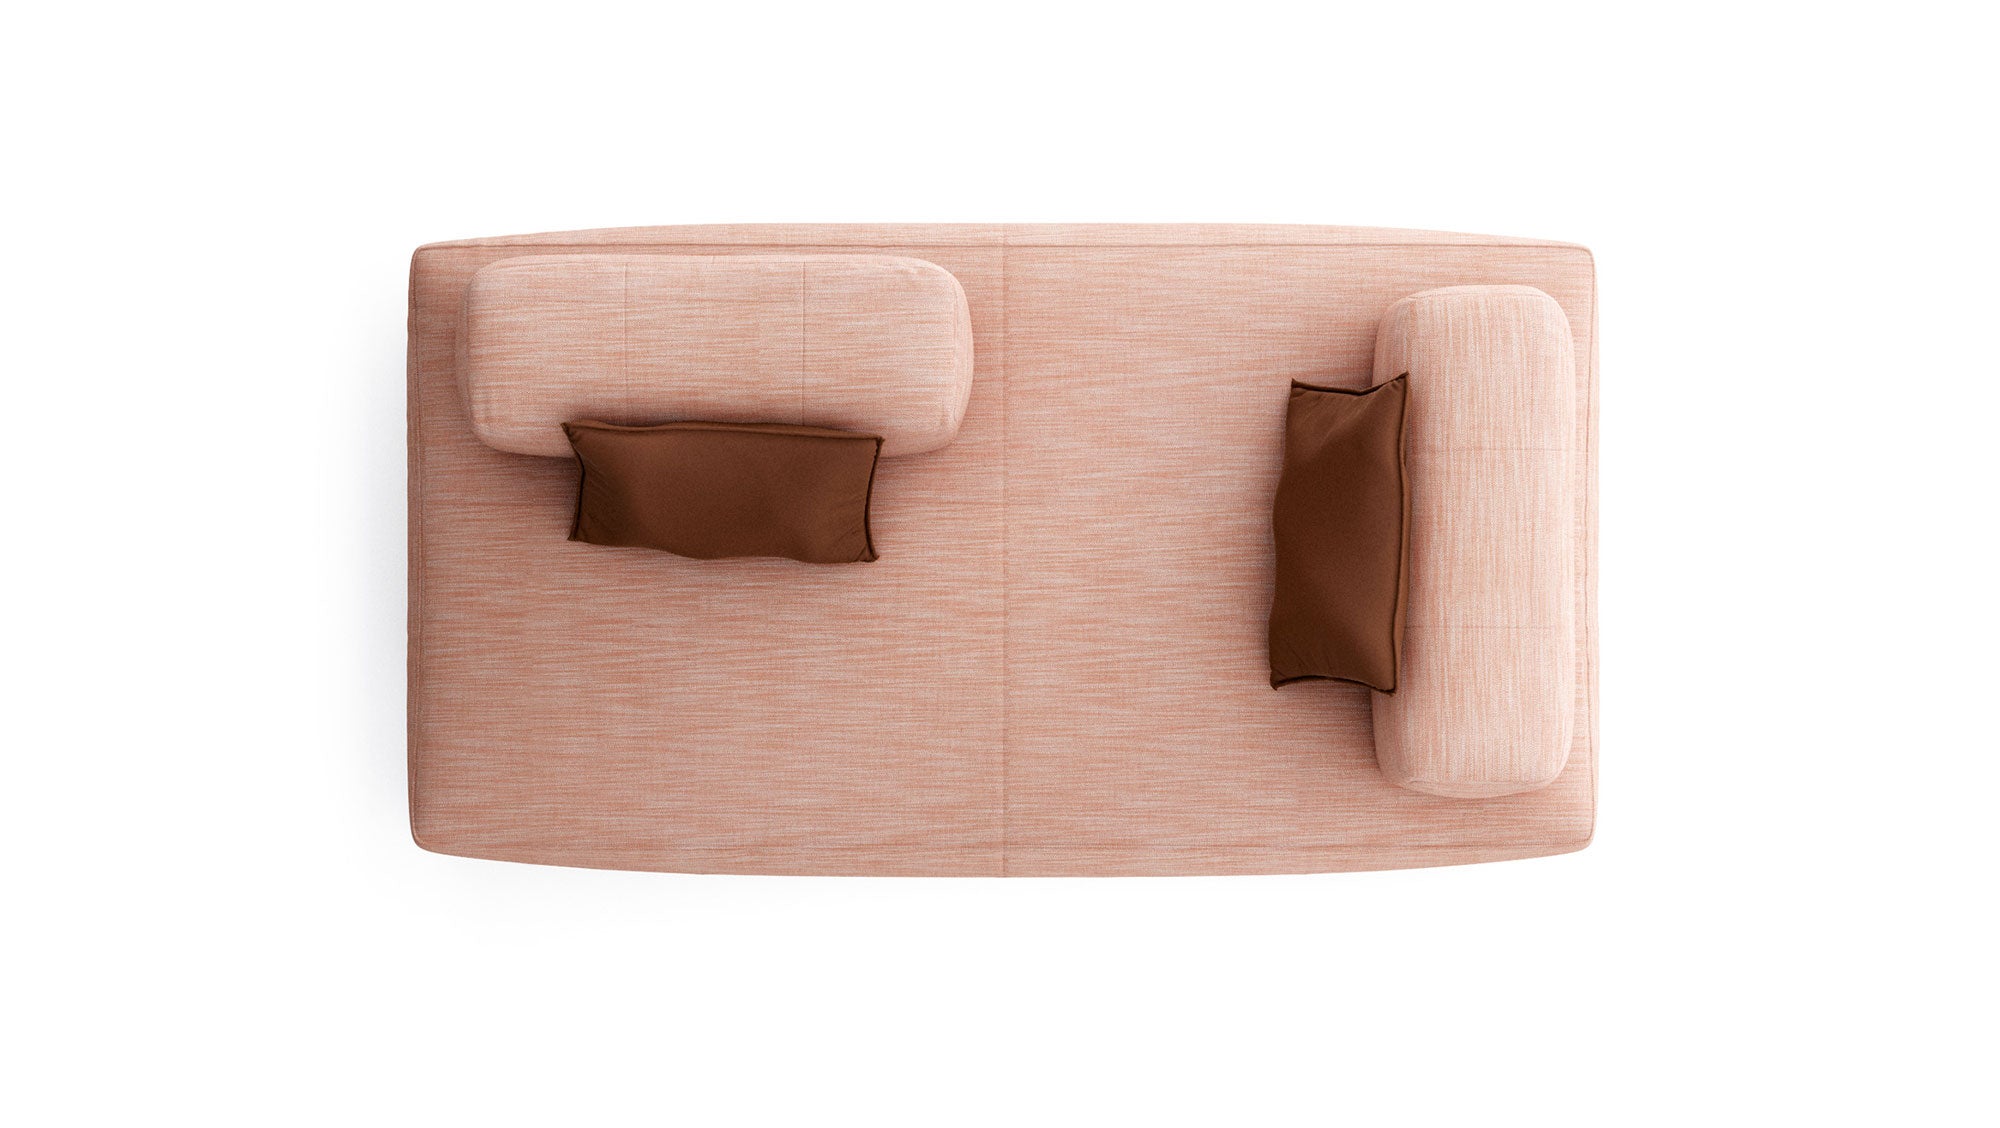 The Best Double Sided Sofas for Open Interiors